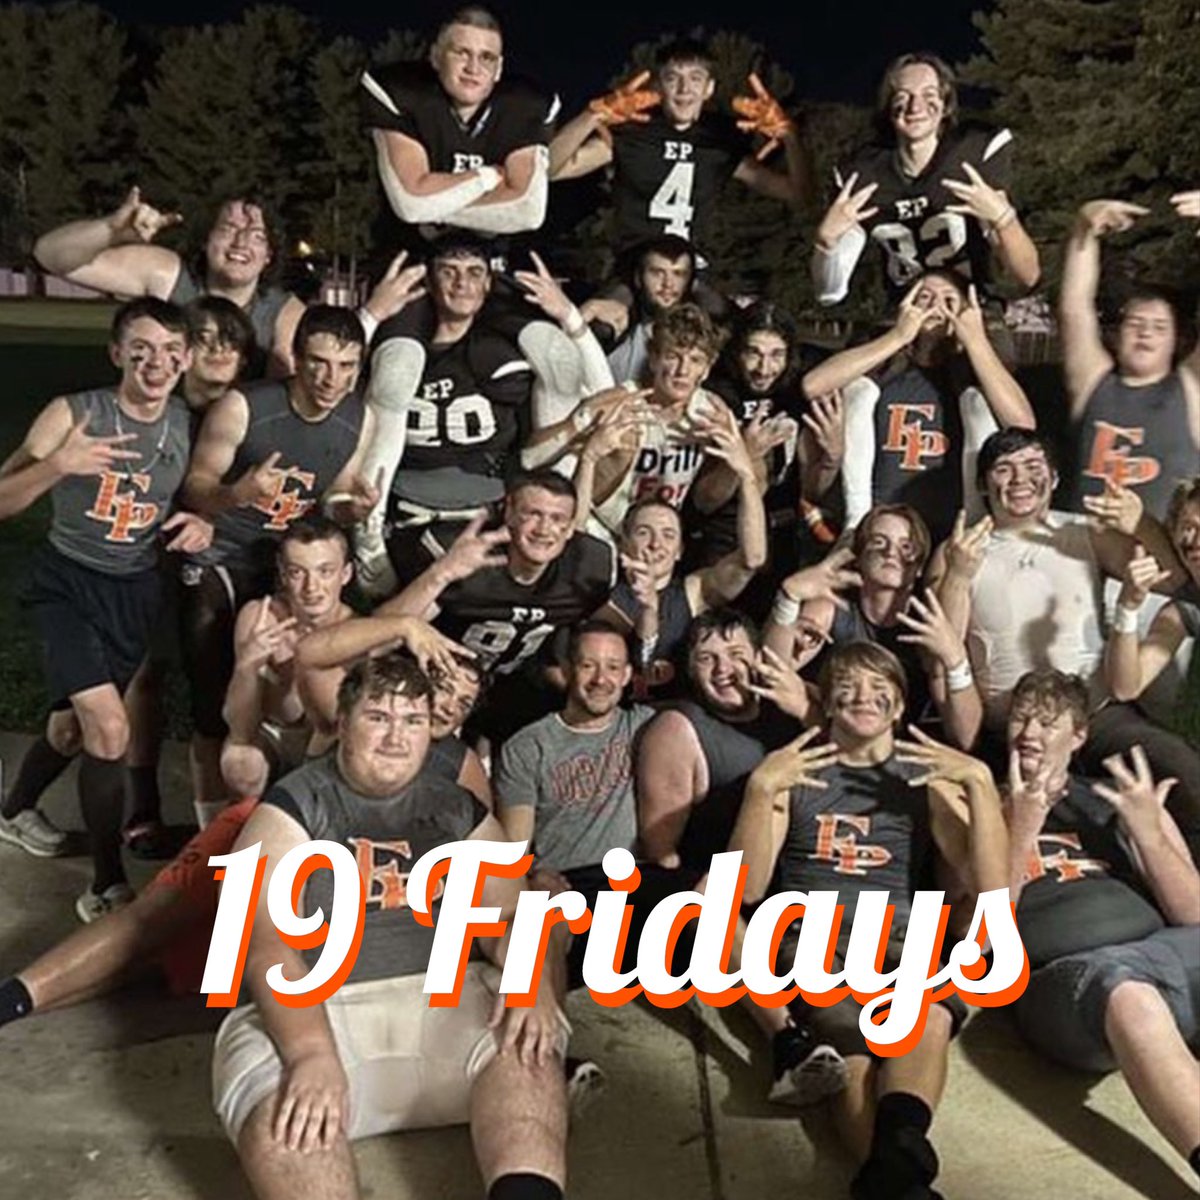 19 Friday’s until all the offseason hard work pays off!! Can’t wait for the Friday Night Feeling! #FridayCountdown #TheseDogsAreDifferent #TheDogsAreBack